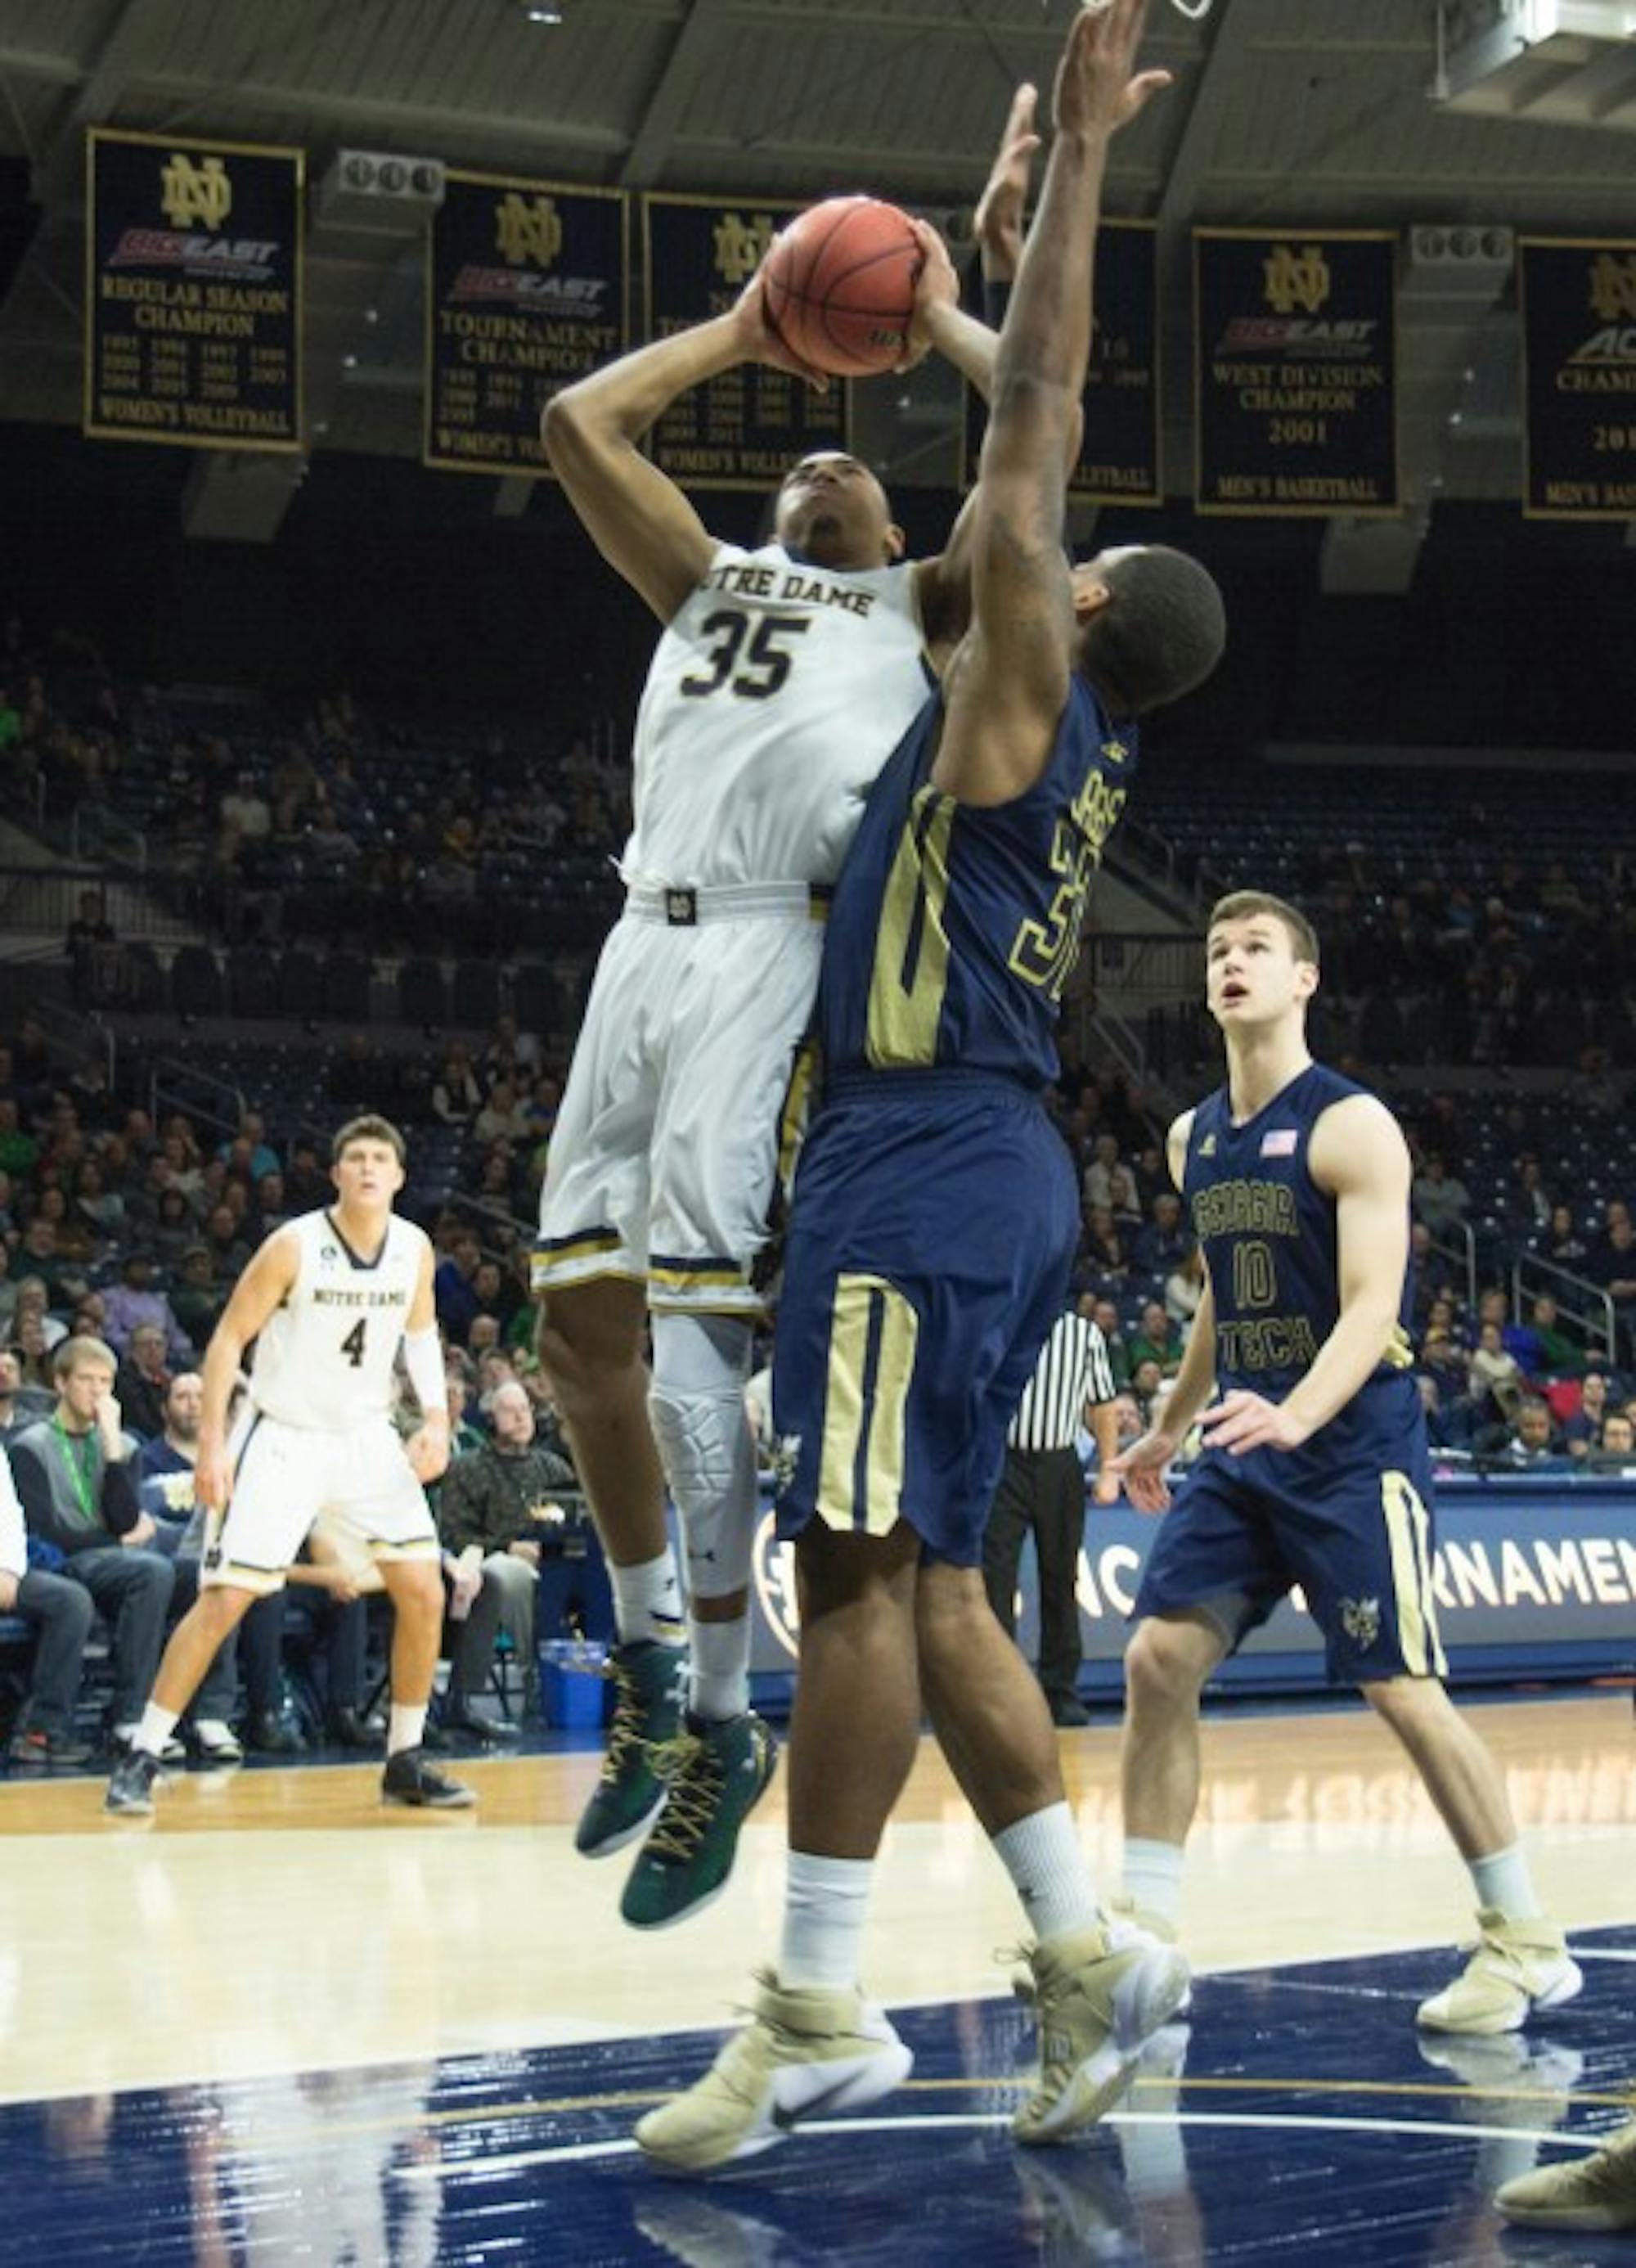 Sophomore forward Bonzie Colson goes up for a layup during Notre Dame’s 72-64 victory over Georgia Tech on Wednesday at Purcell Pavilion. Colson scored a career-high 31 points on Saturday against Duke.